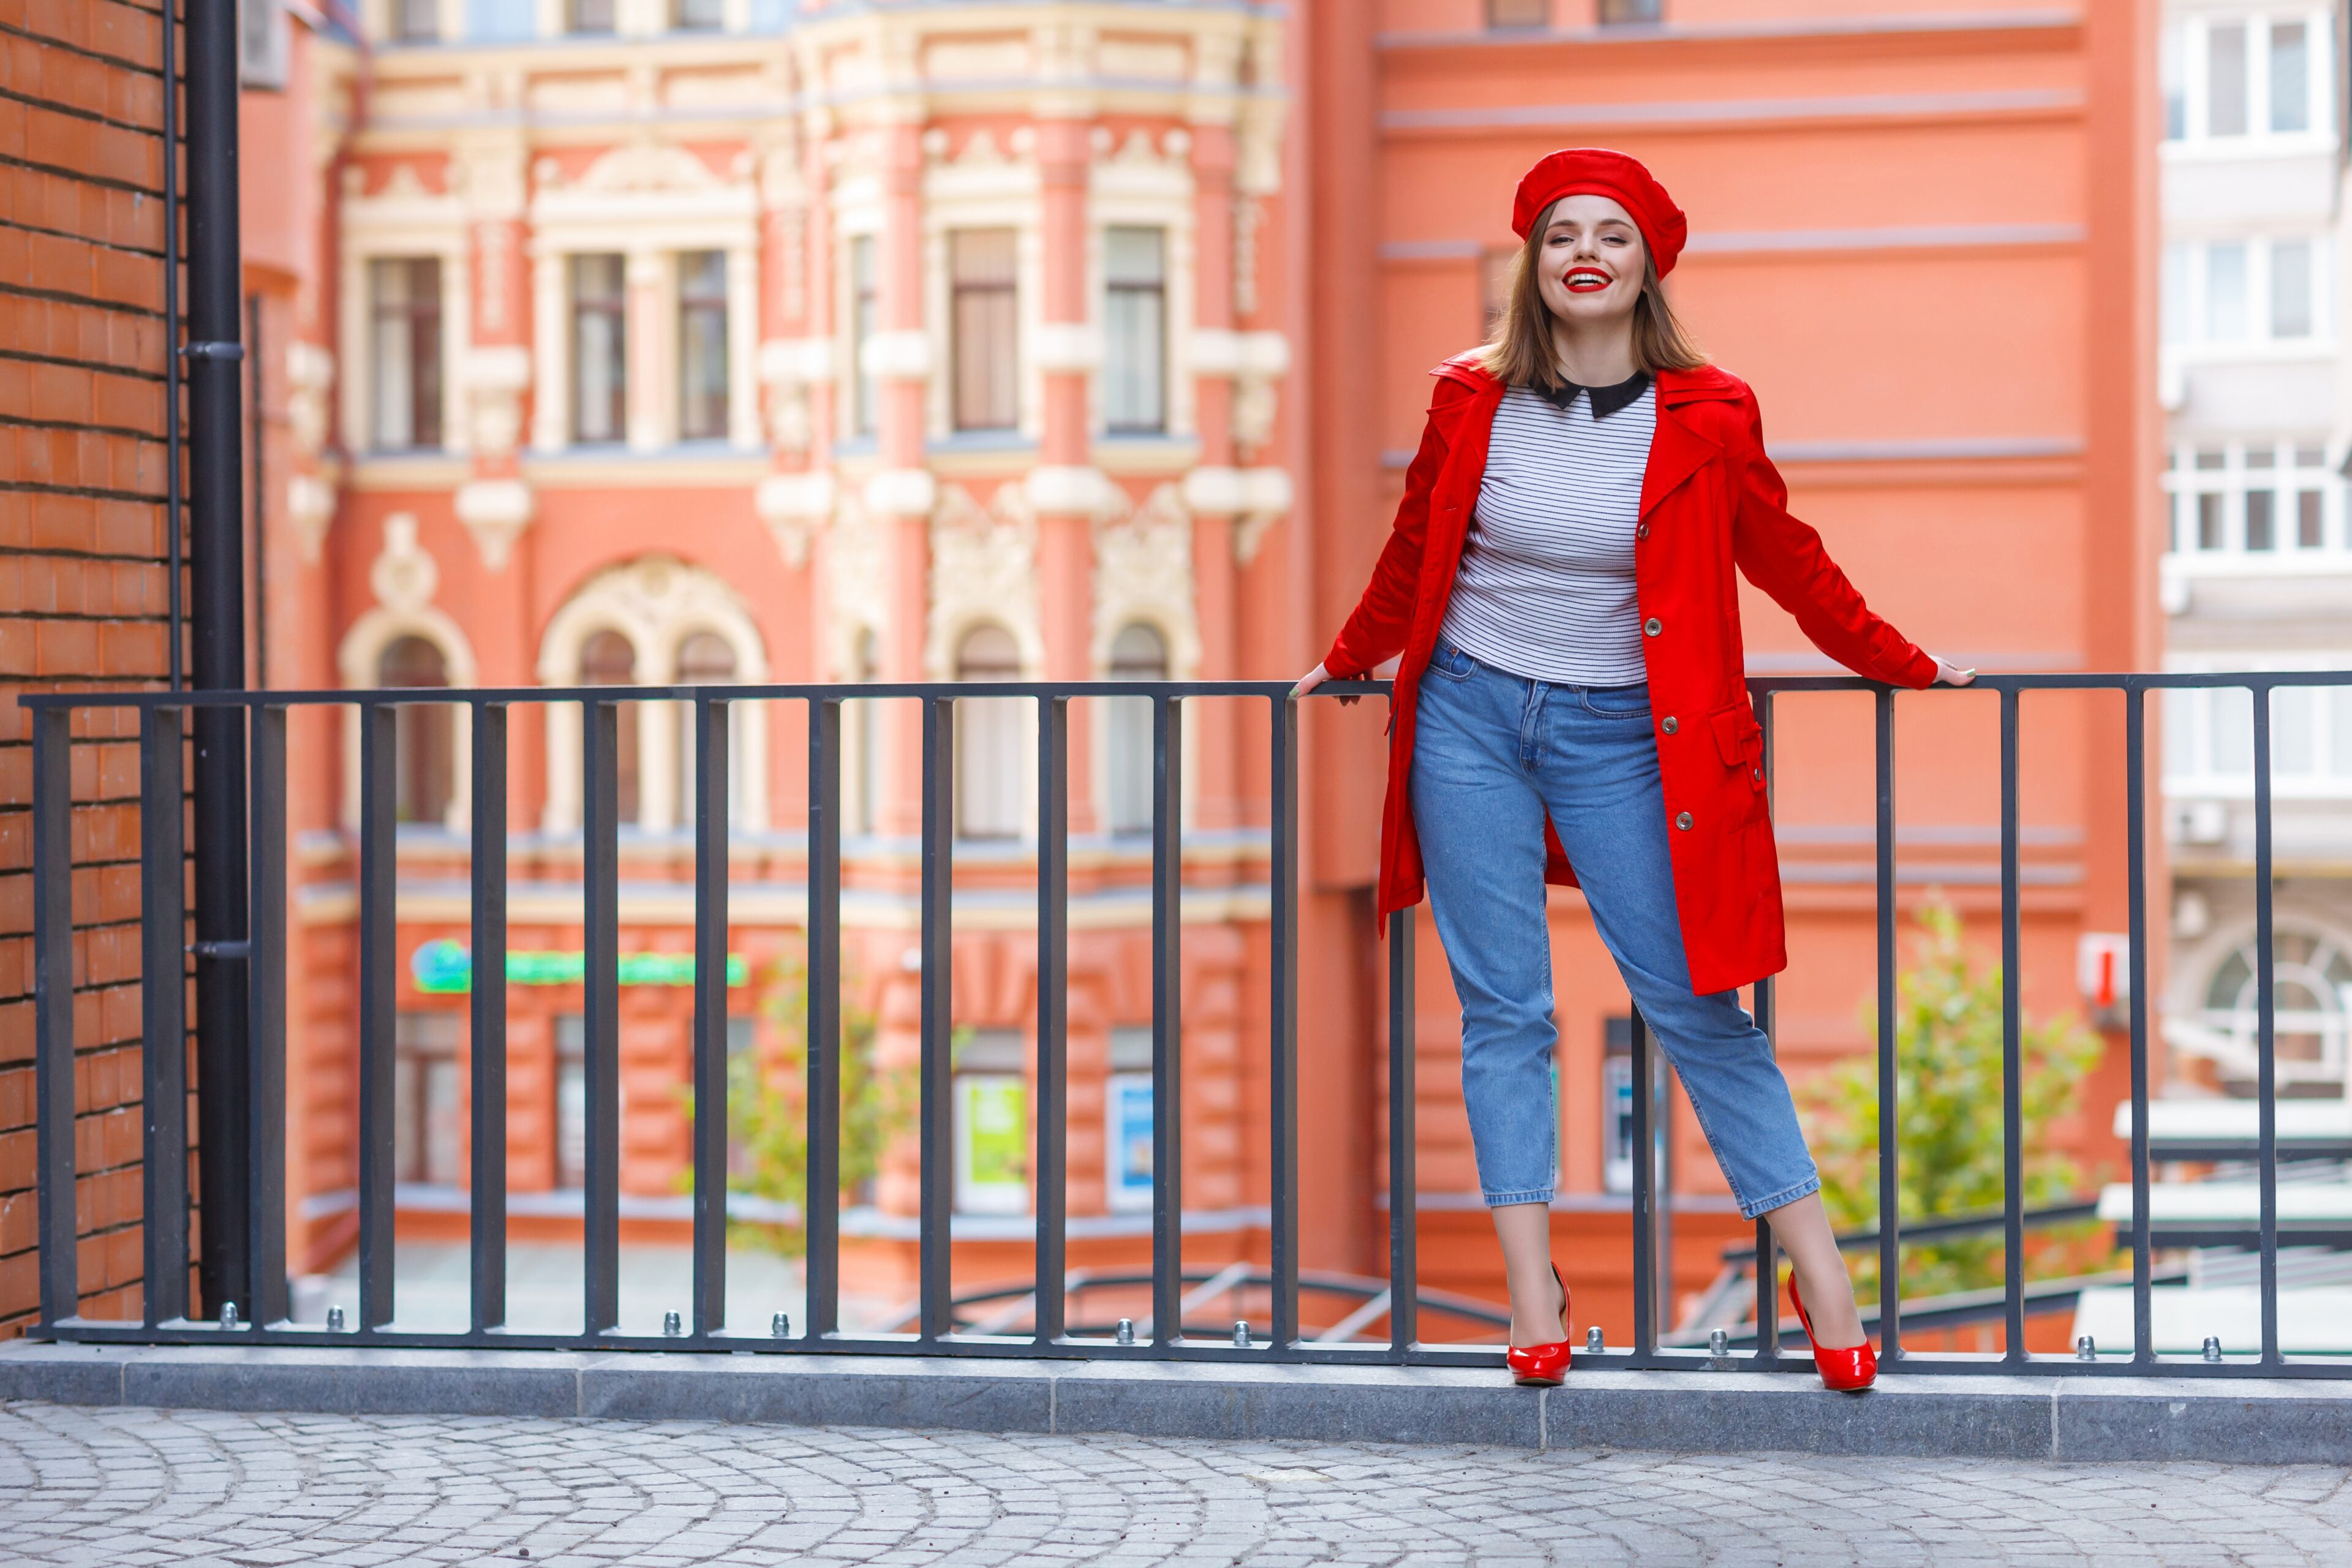 Jeans, Red Coat, And Red High-Heeled Shoes